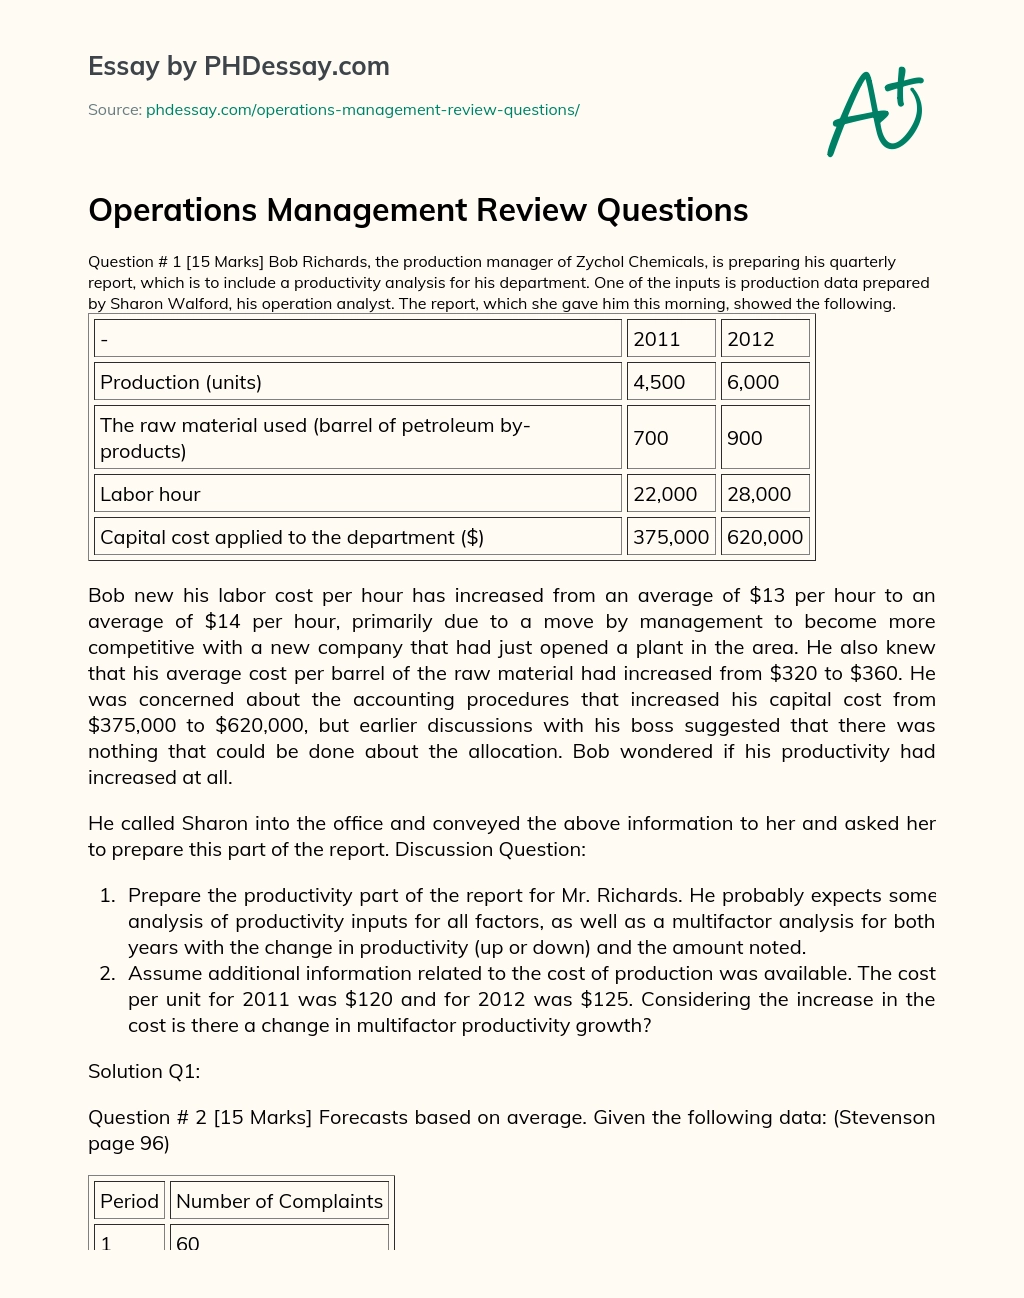 Operations Management Review Questions essay